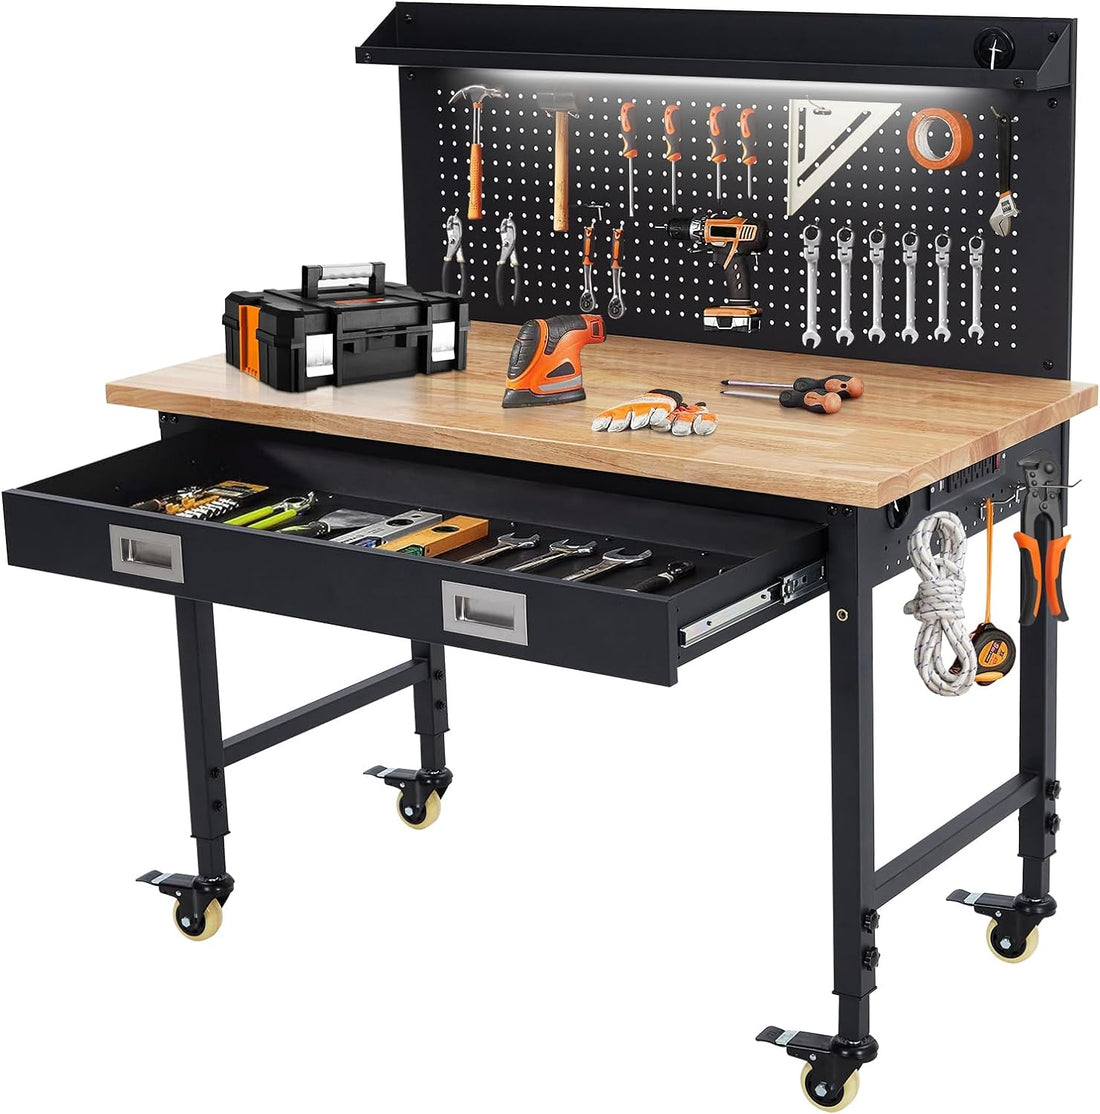 48" x 24" Adjustable Workbench 2000 Lbs Capacity, Rubber Wood Shop Table Heavy Duty Workstation with Drawer Table, Backplate, Metal Frame, Wood Top Workbench for Workshop Office Home Garage